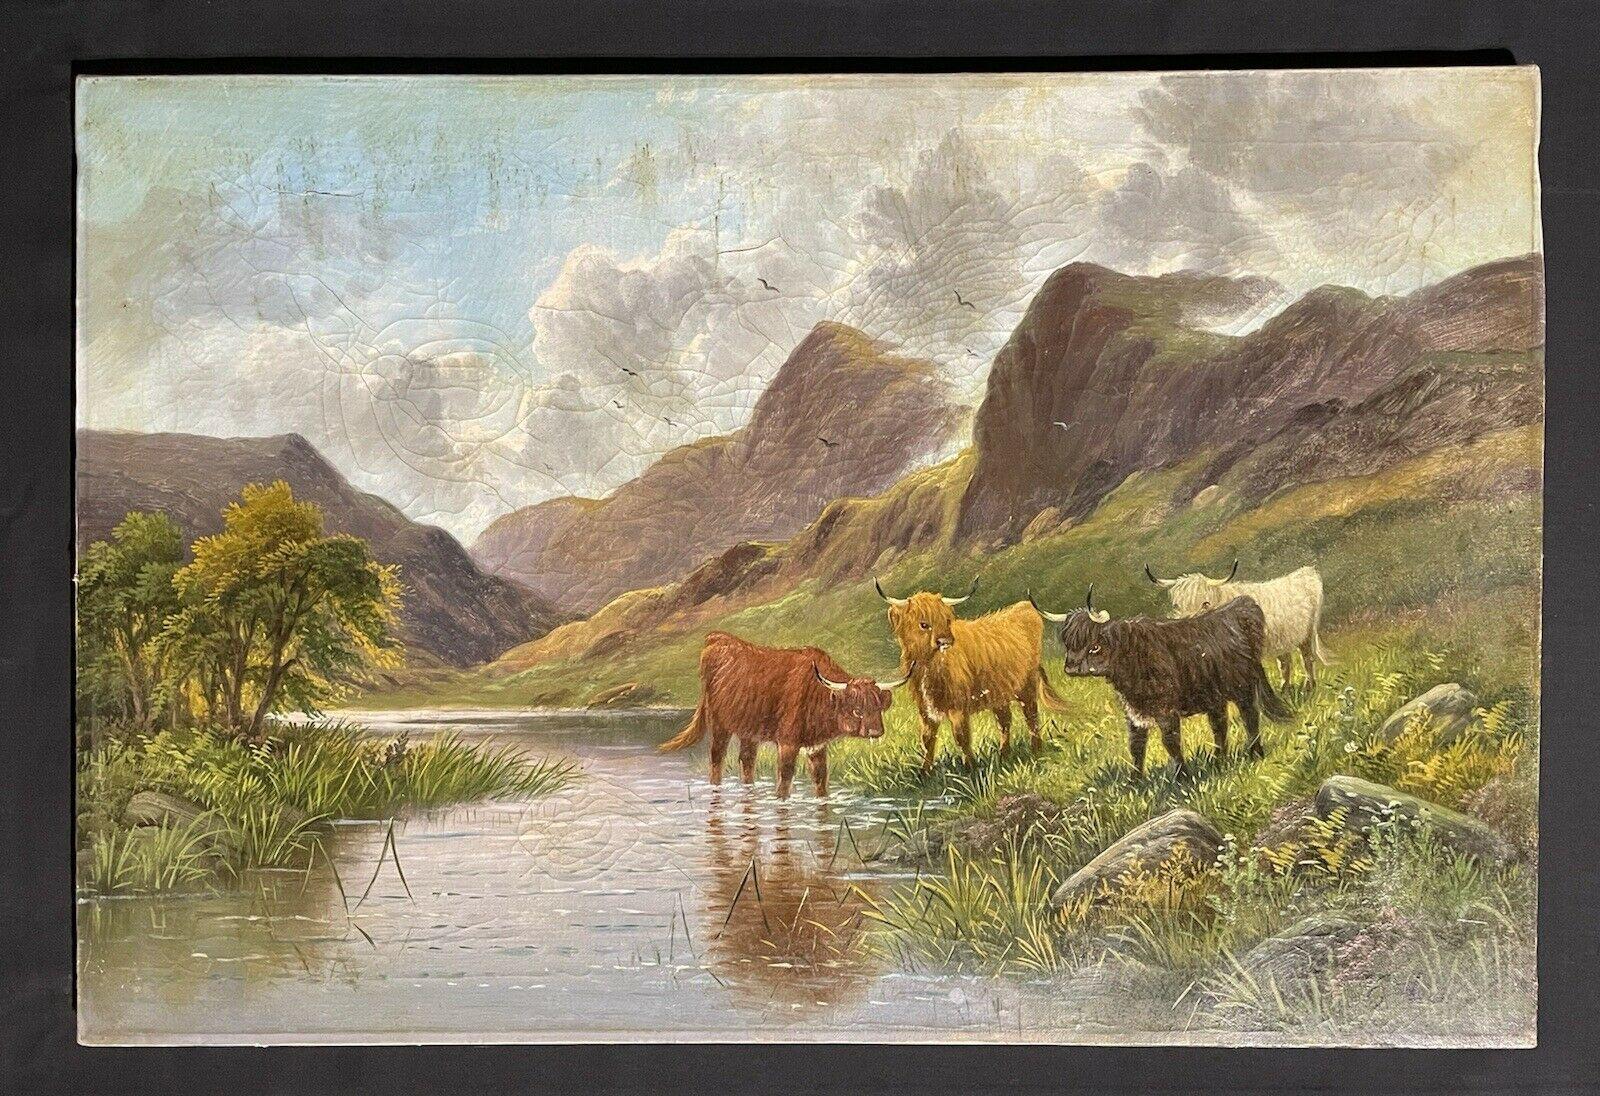 ANTIQUE SCOTTISH SIGNED OIL - CATTLE WATERING IN MOUNTAINOUS SUMMERS RIVER GLEN - Painting by E. Heaton